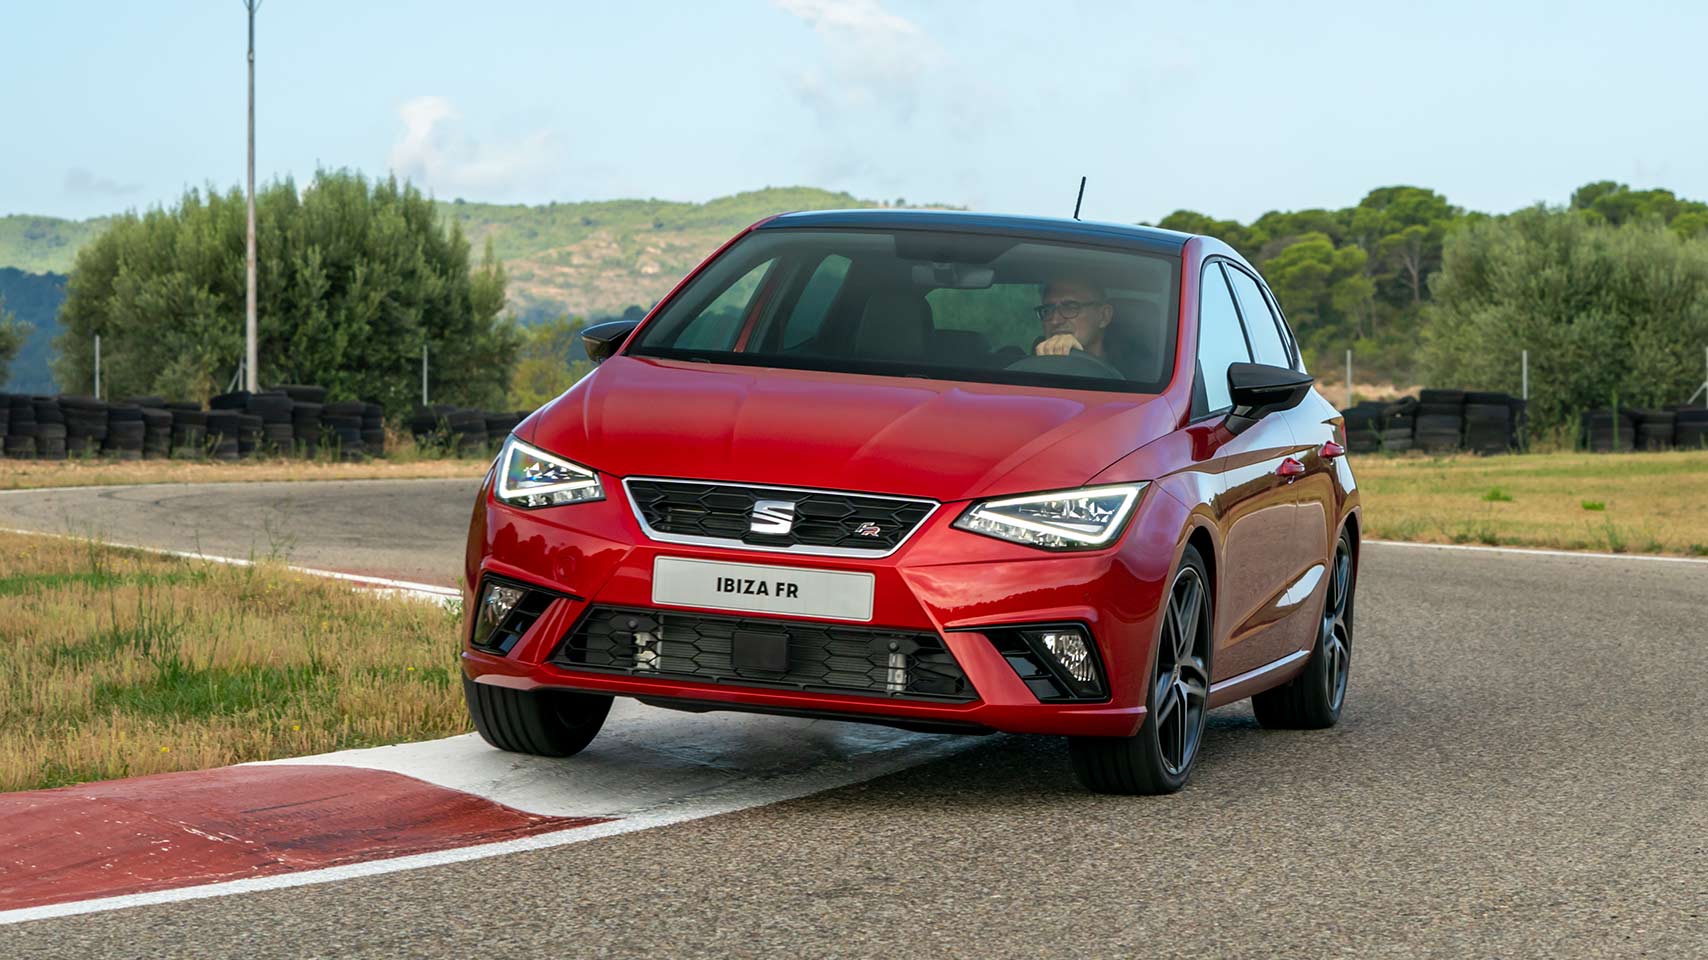 SEAT essence: 70 years concentrating sportiness in a compact size.